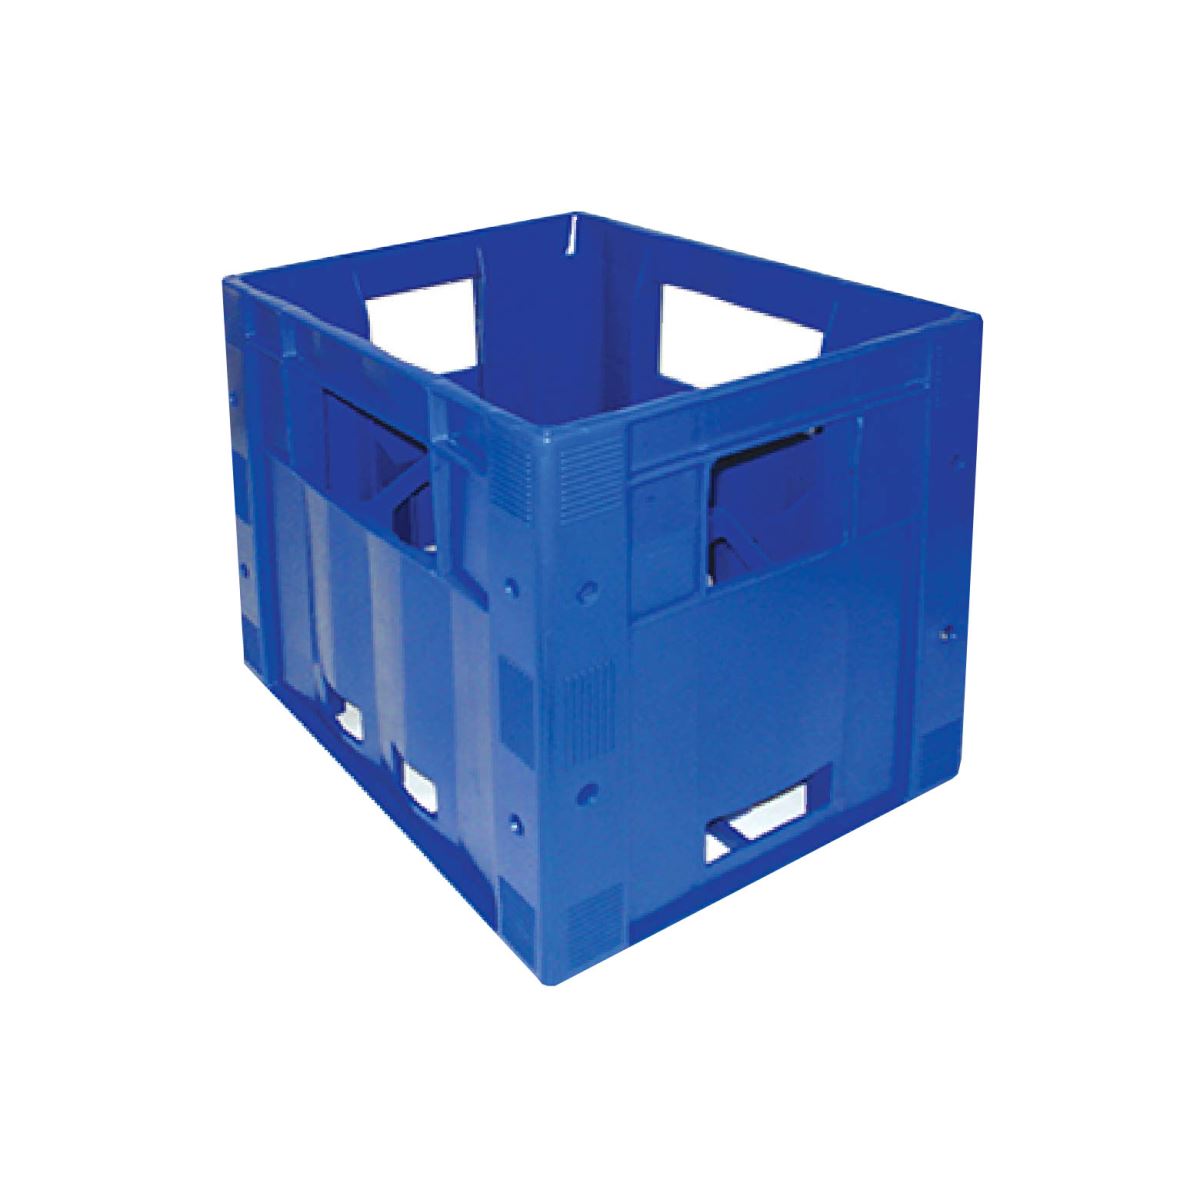 12 Hole 84x335 mm Bottle Crate